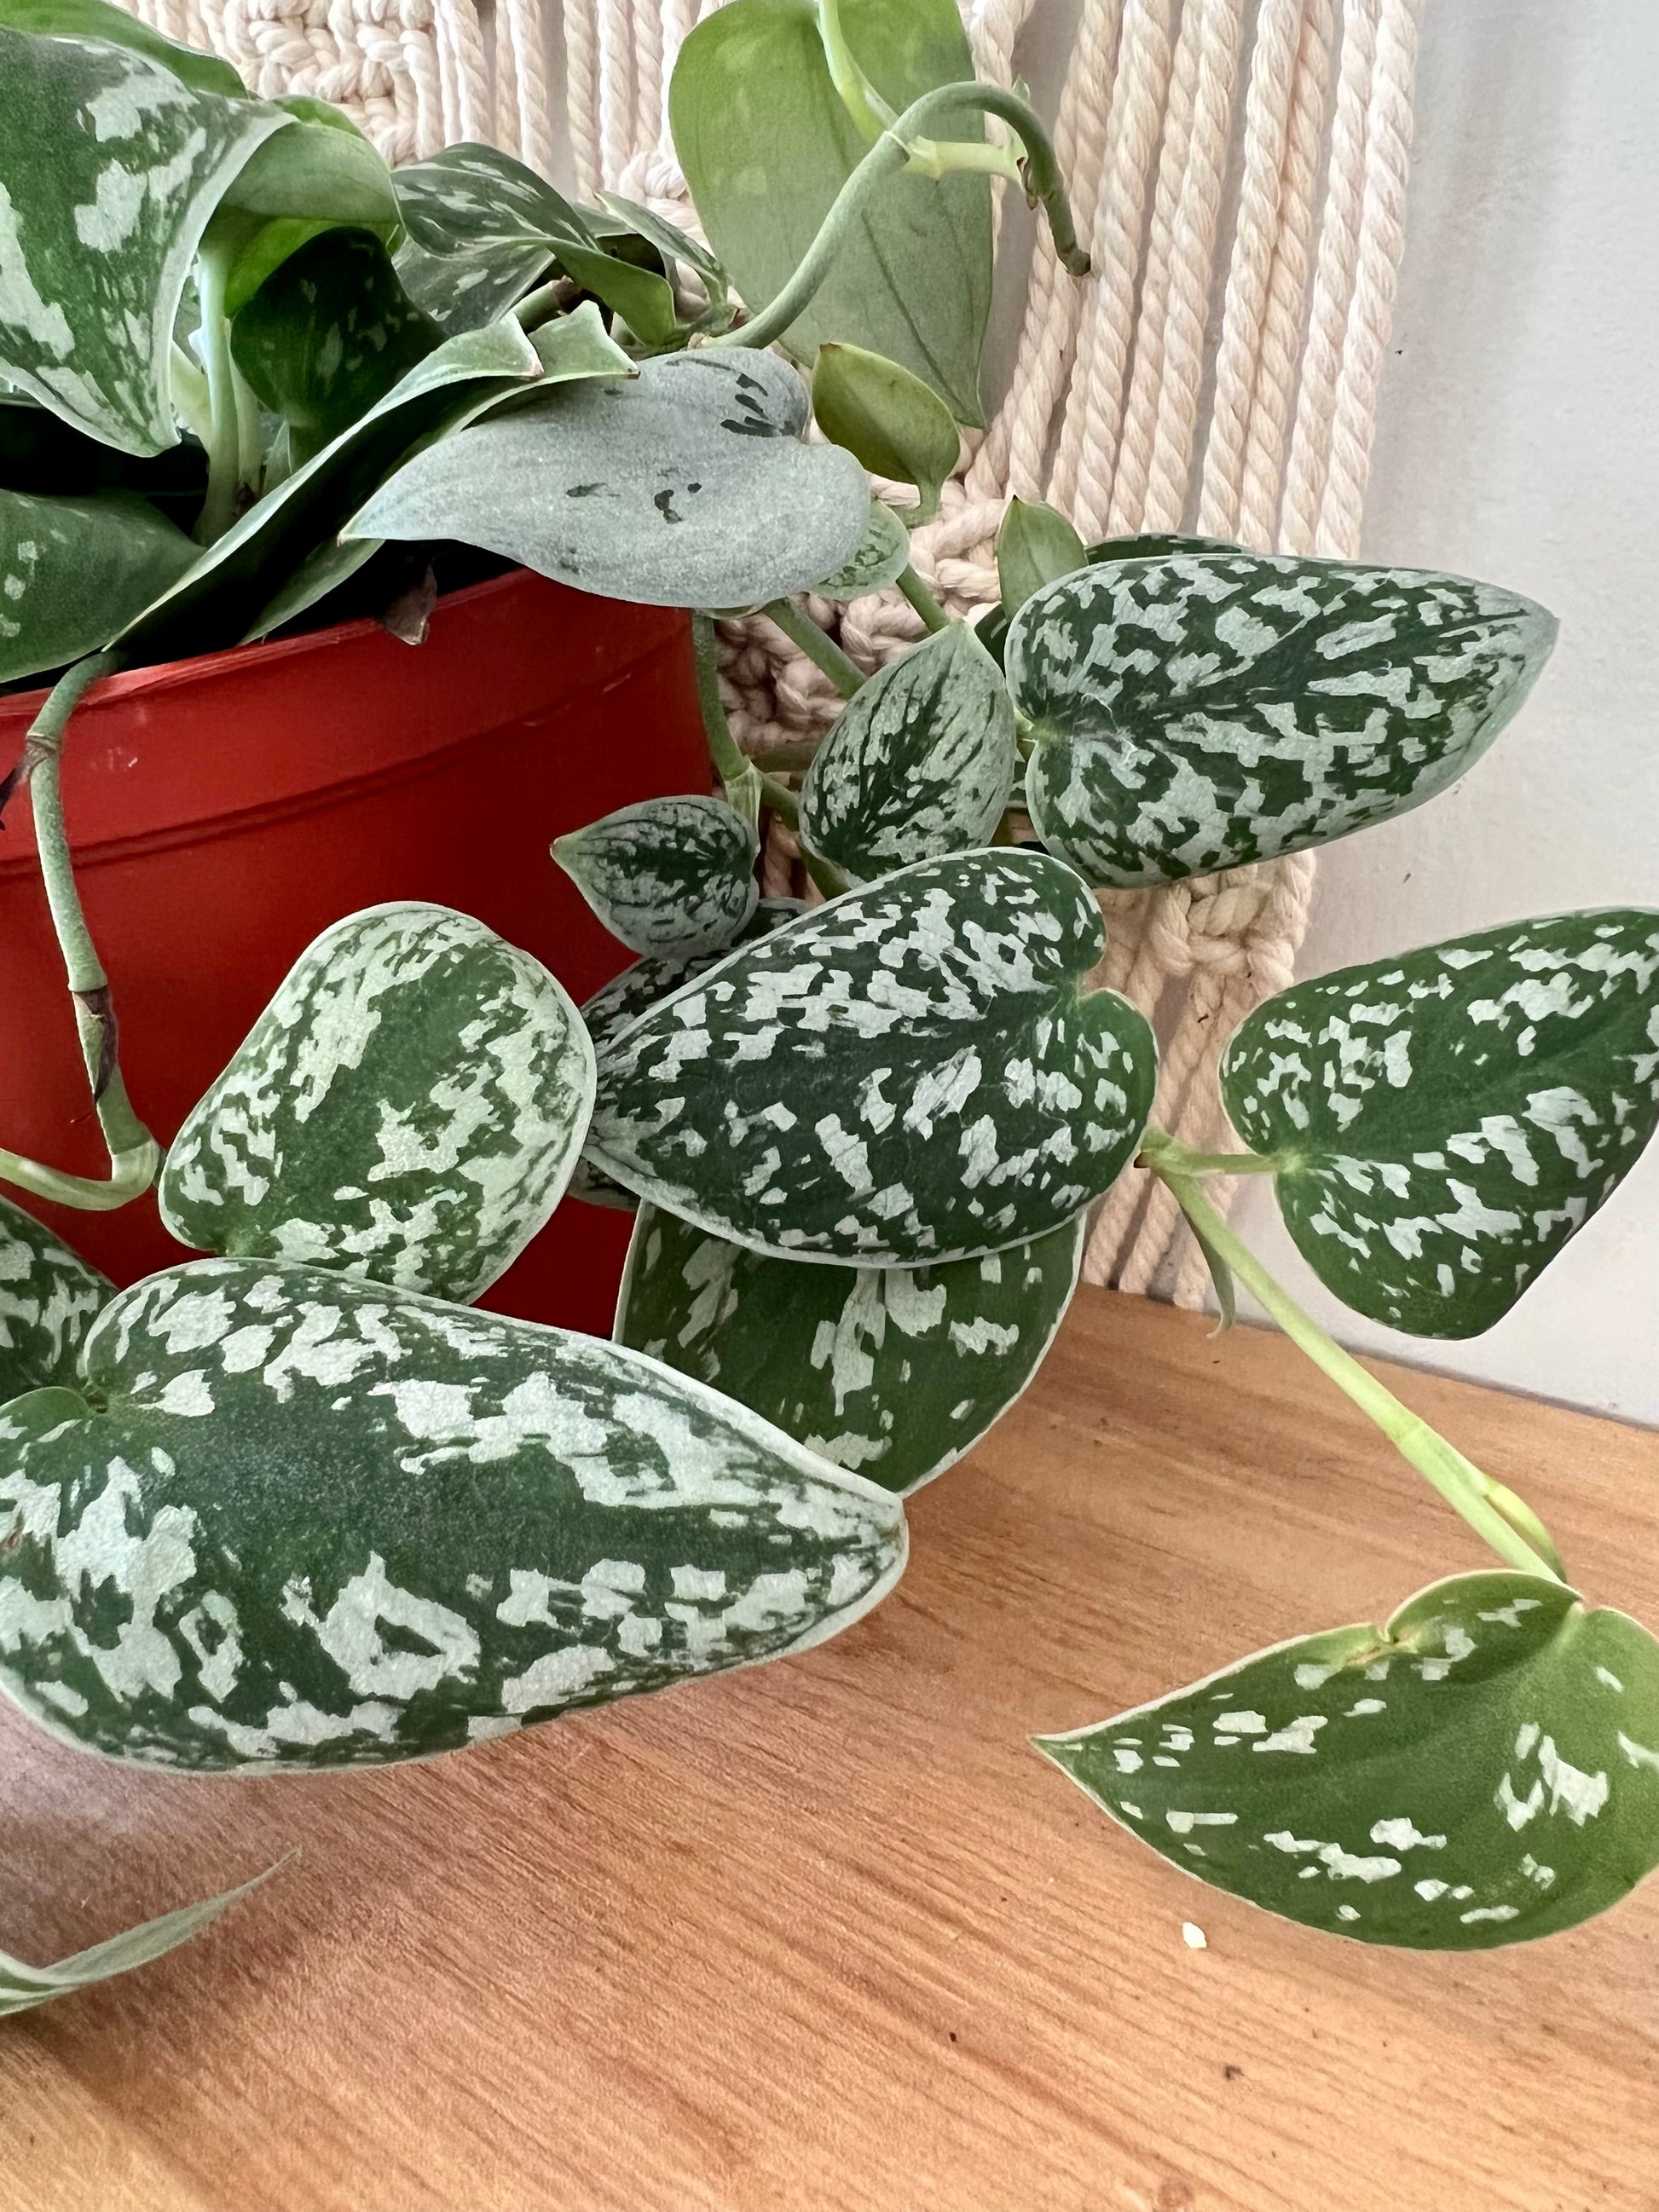 Silver Satin Pothos – We Are Plant Lovers